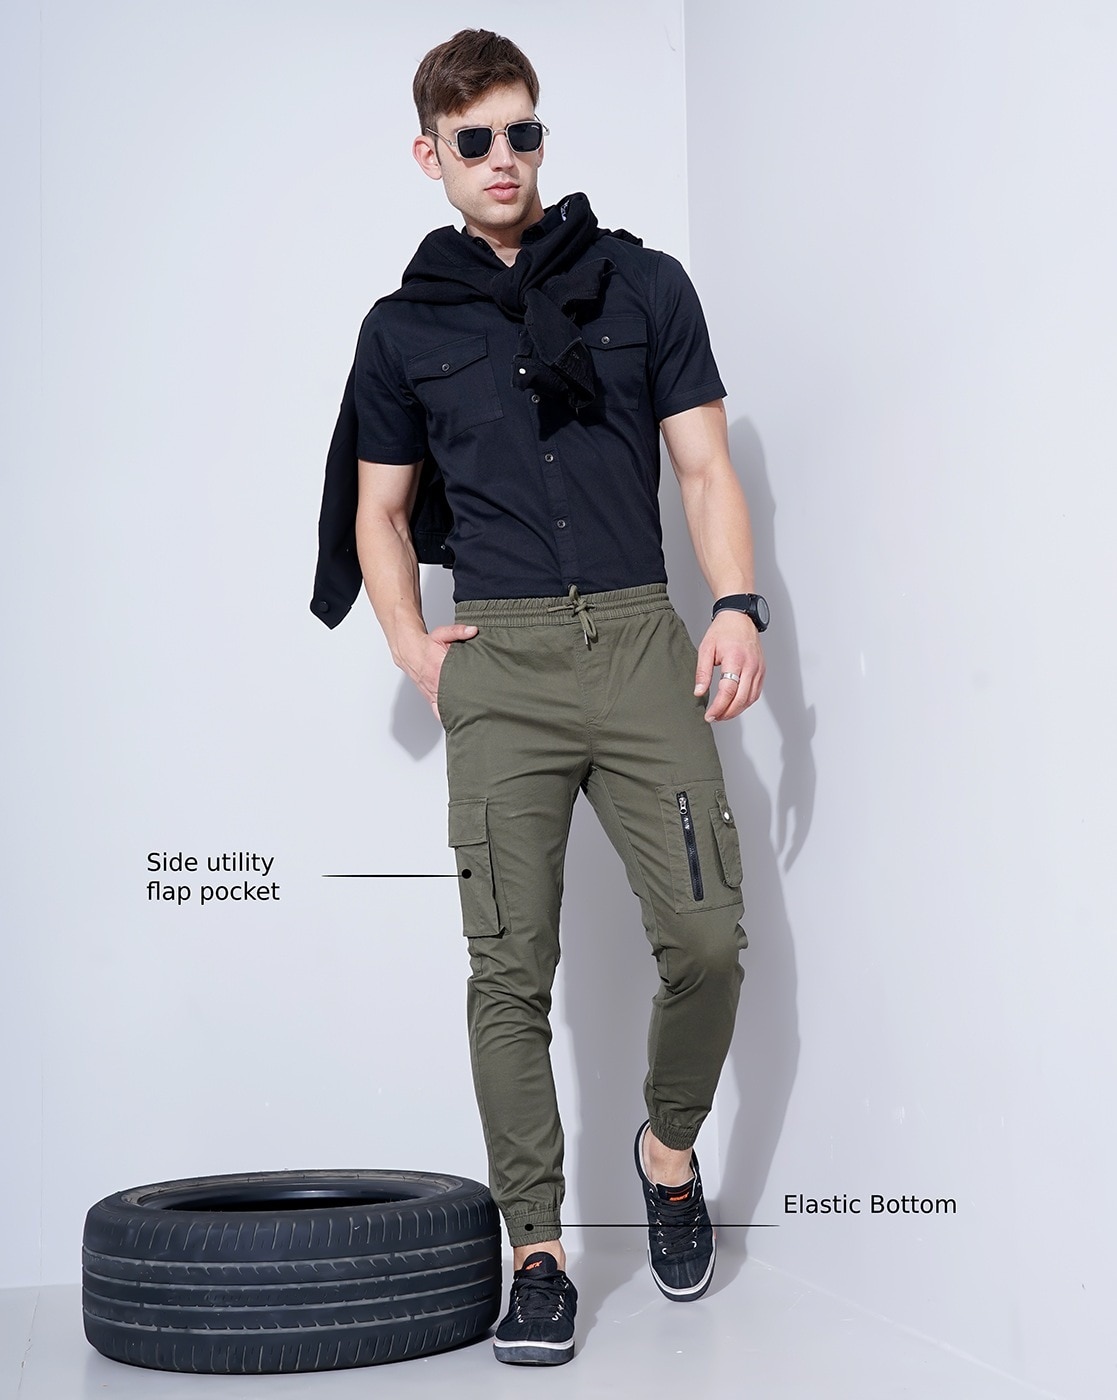 Buy Olive Green Trousers  Pants for Men by British Club Online  Ajiocom